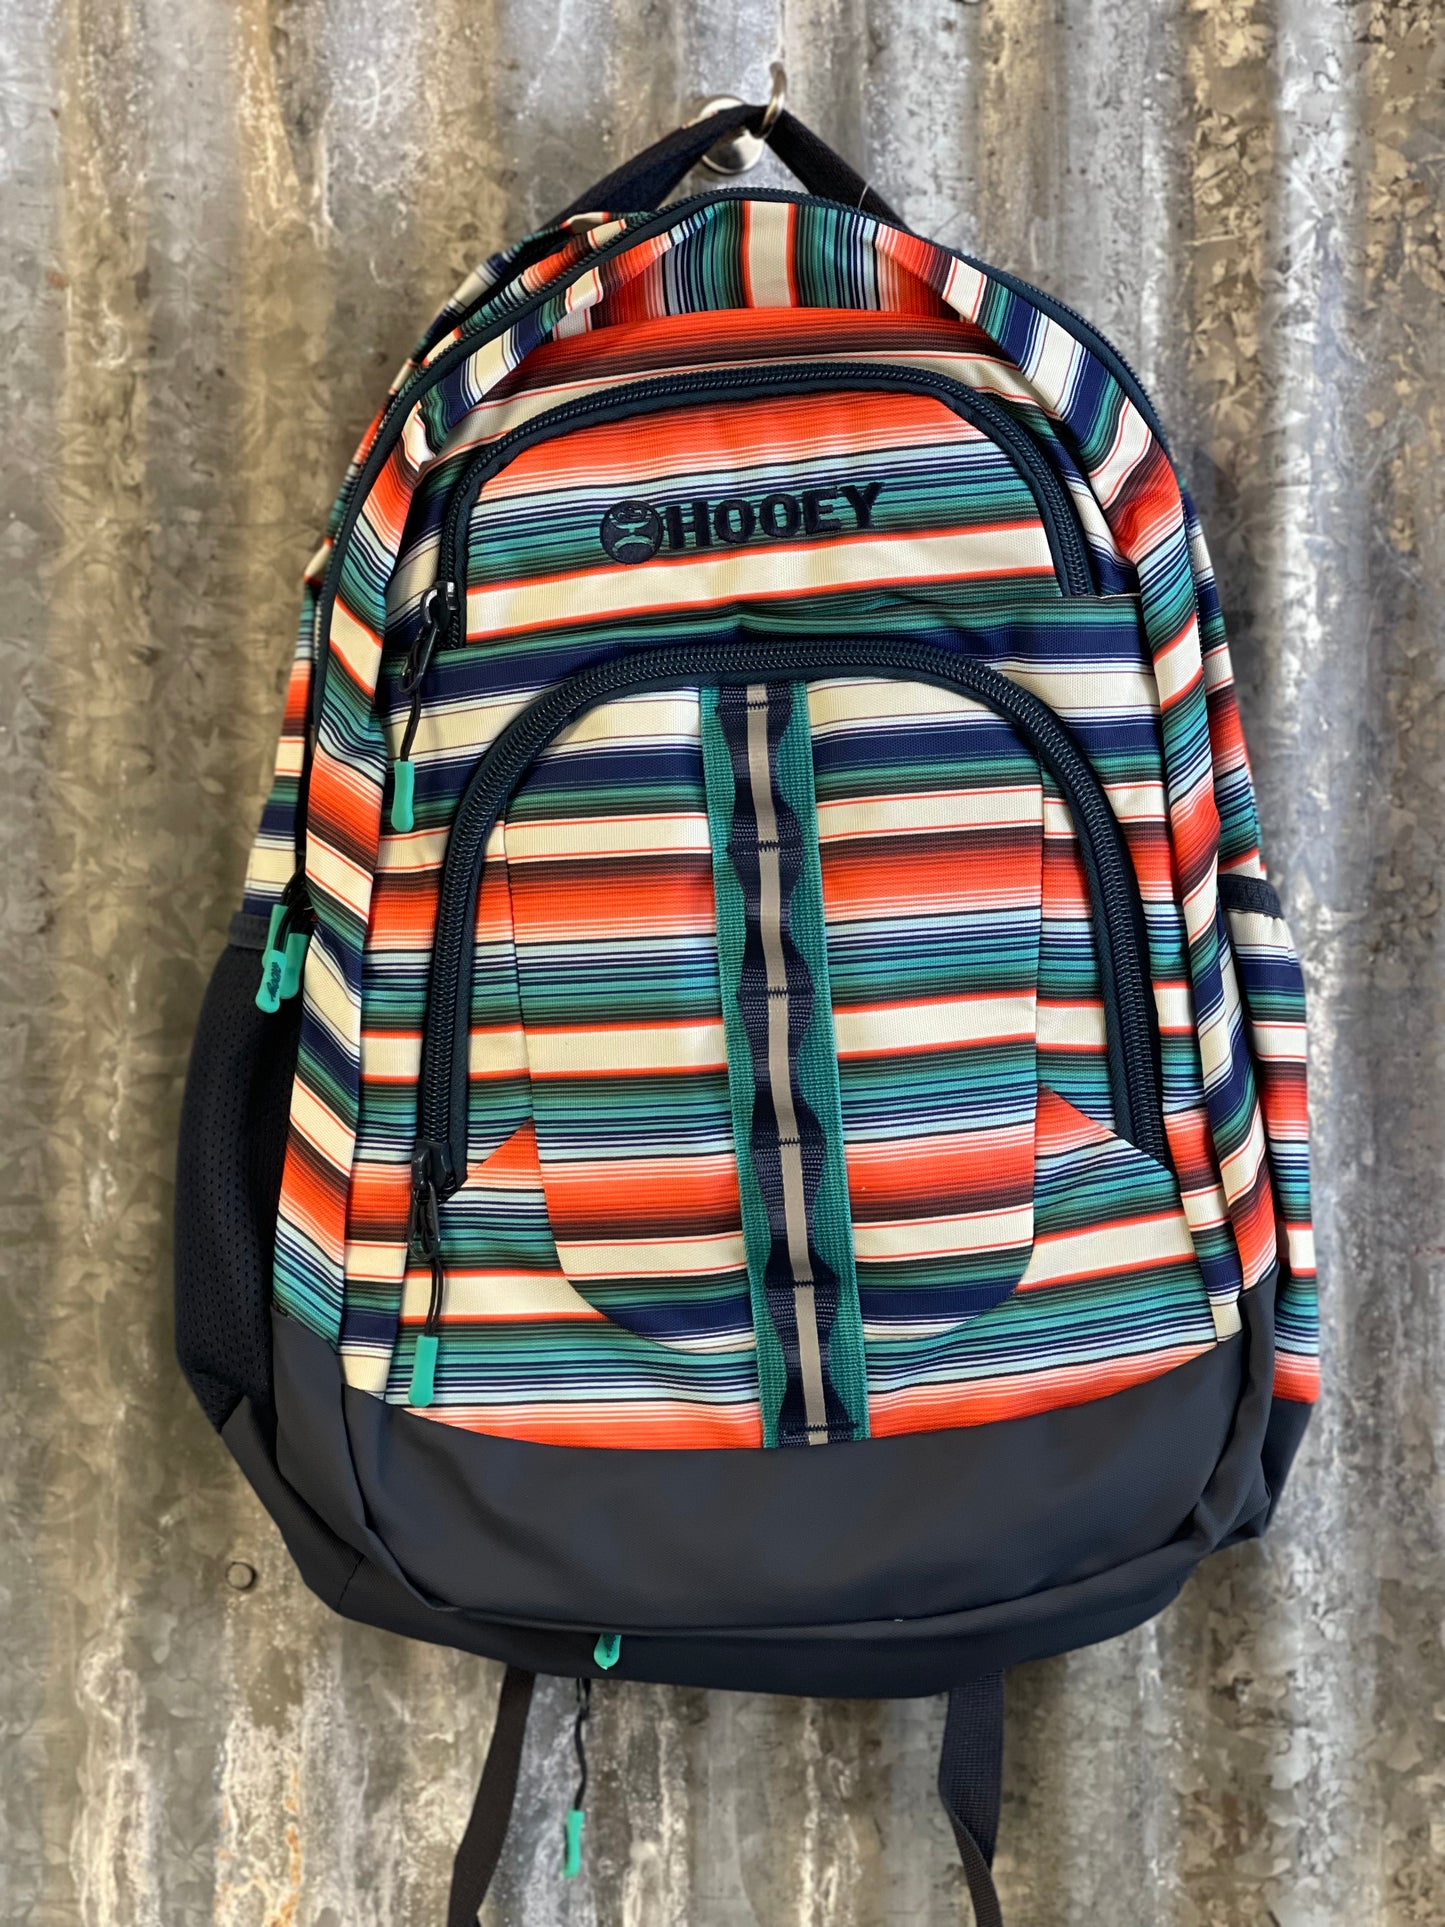 HOOEY “OX” BACKPACK AVAILABLE IN EIGHT COLORS BOOK BAG